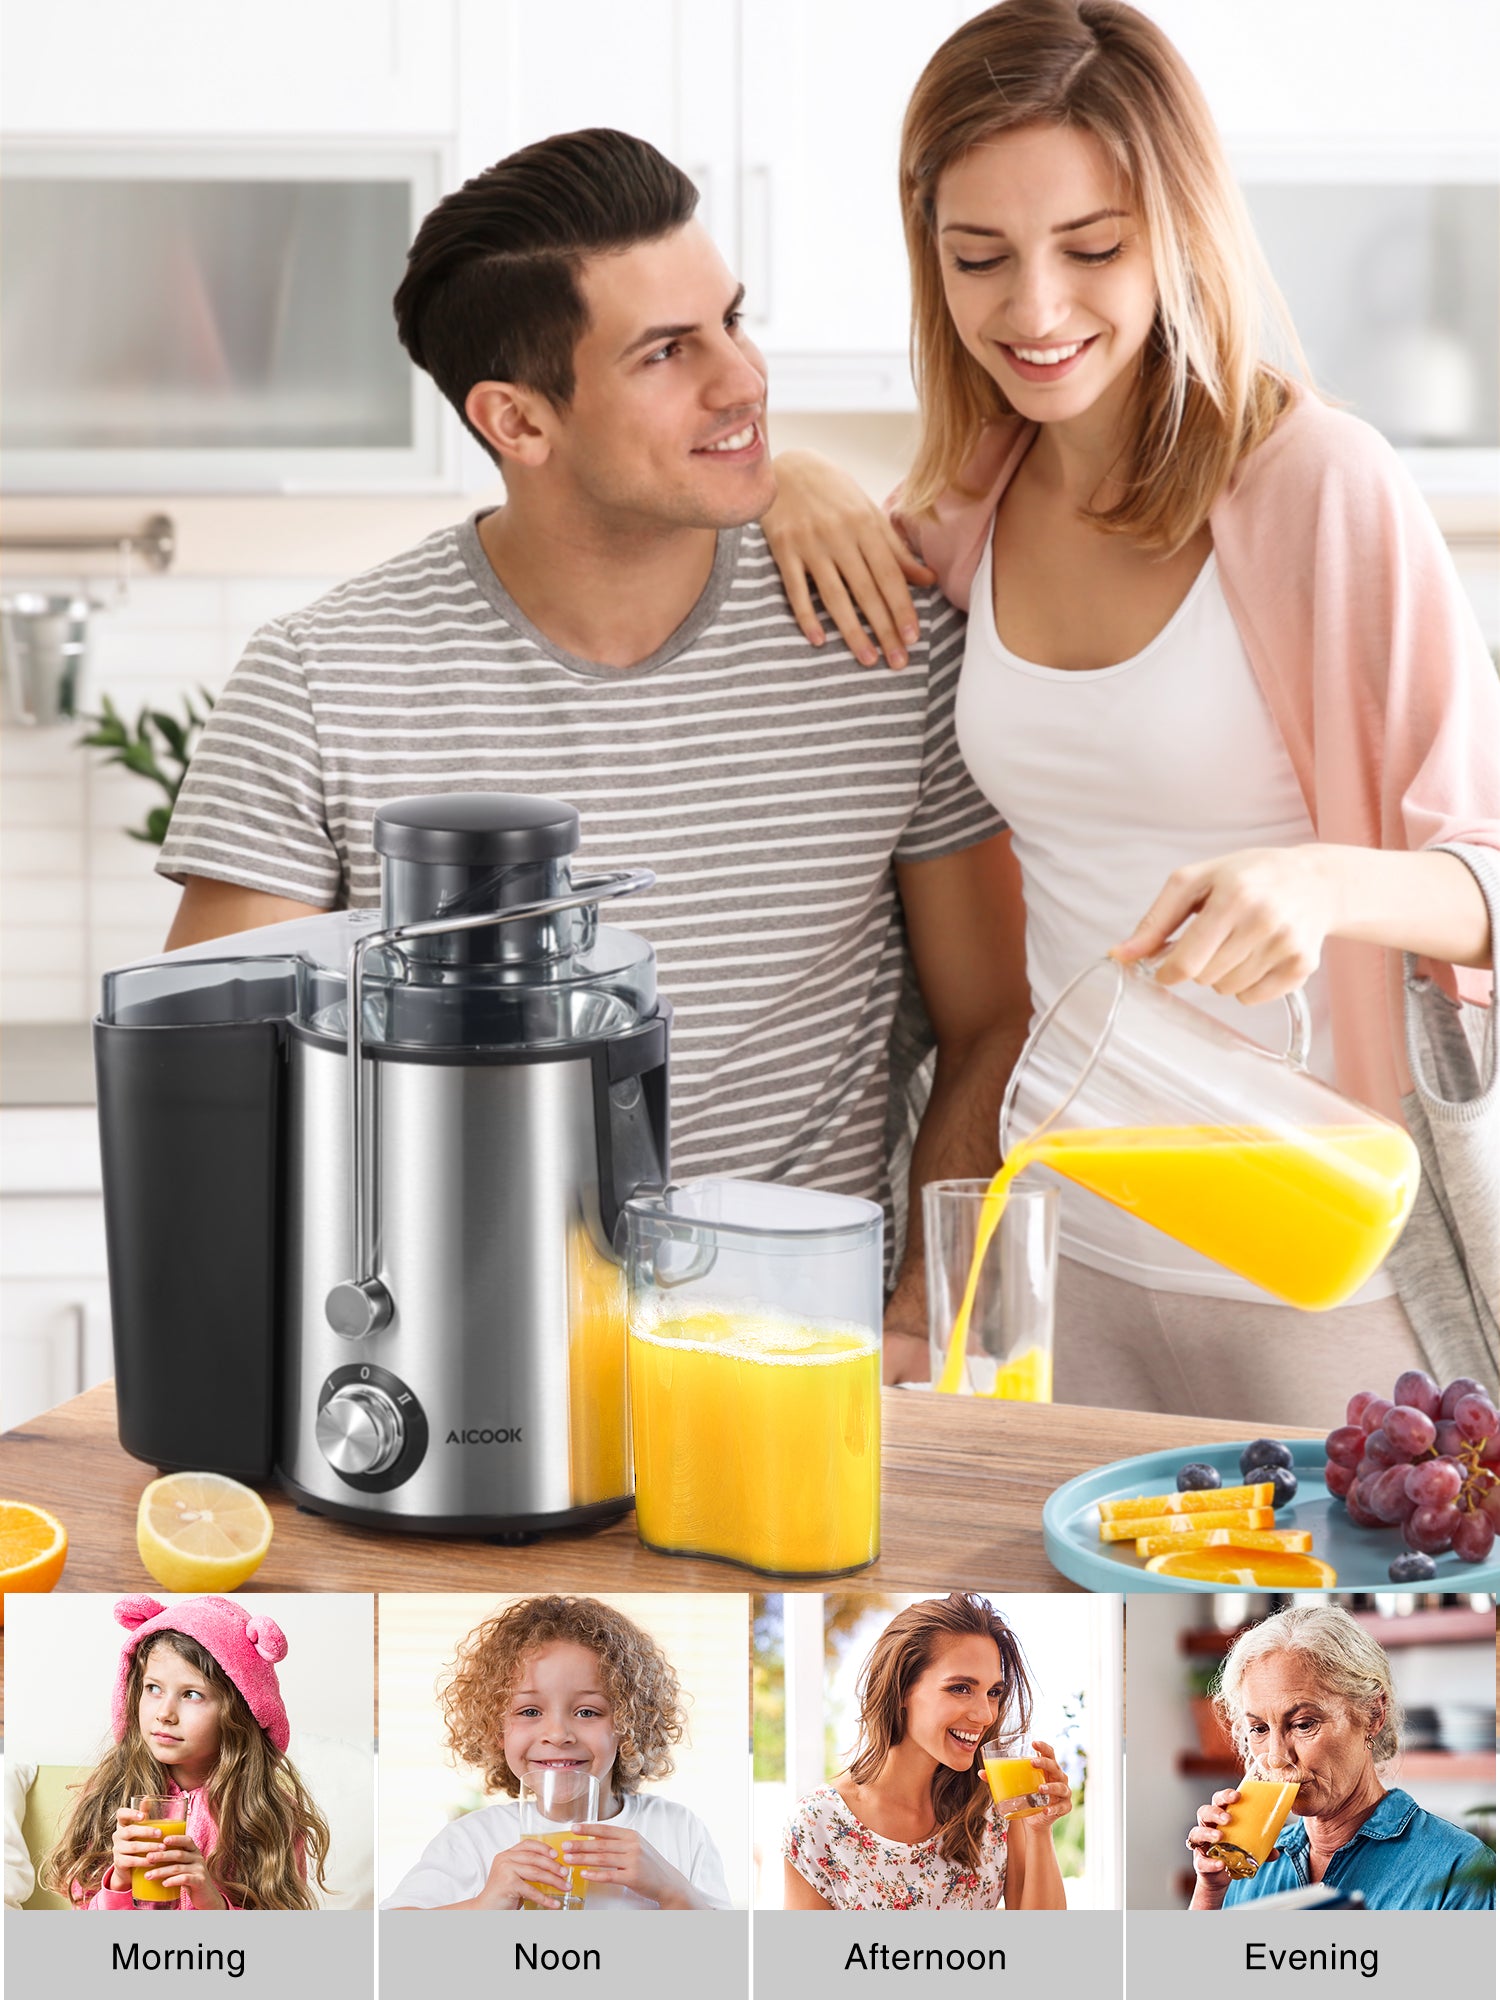 Homeleader Juicer Juice Extractor 3 Speed Centrifugal Juicer with